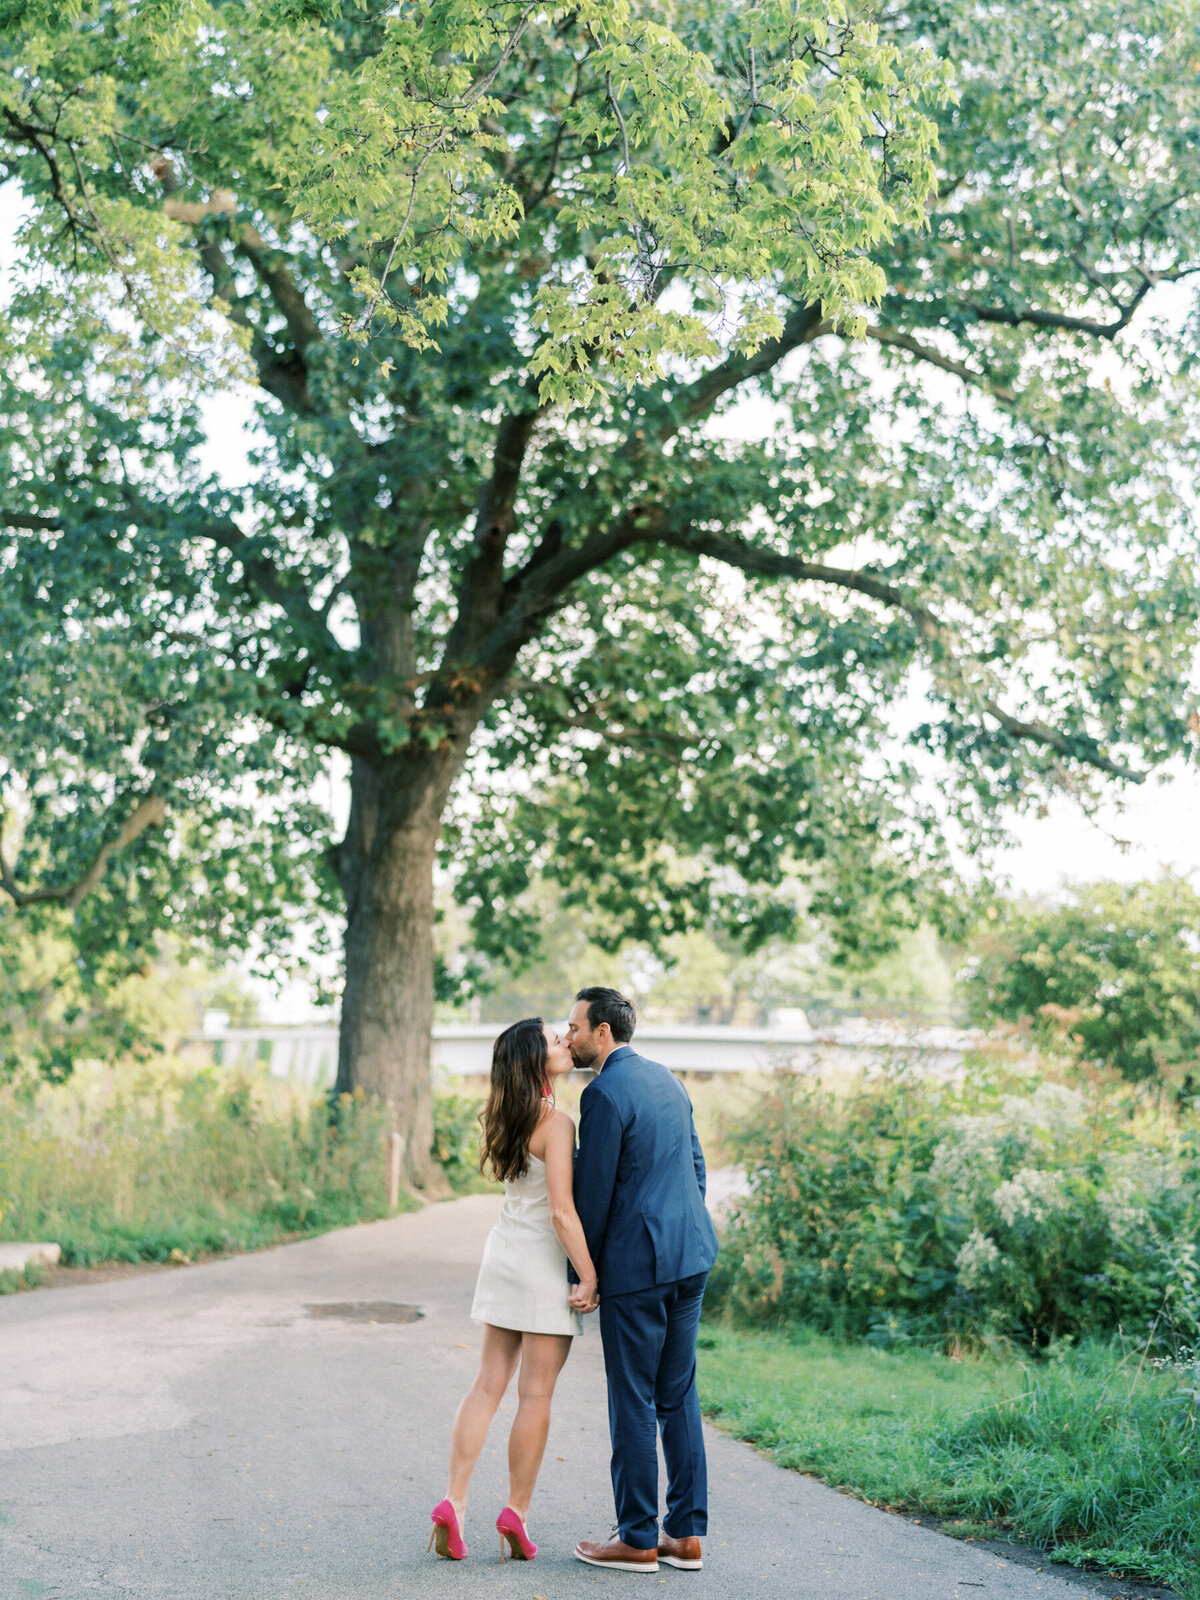 Lincoln Park Chicago Fall Engagement Session Highlights | Amarachi Ikeji Photography 14